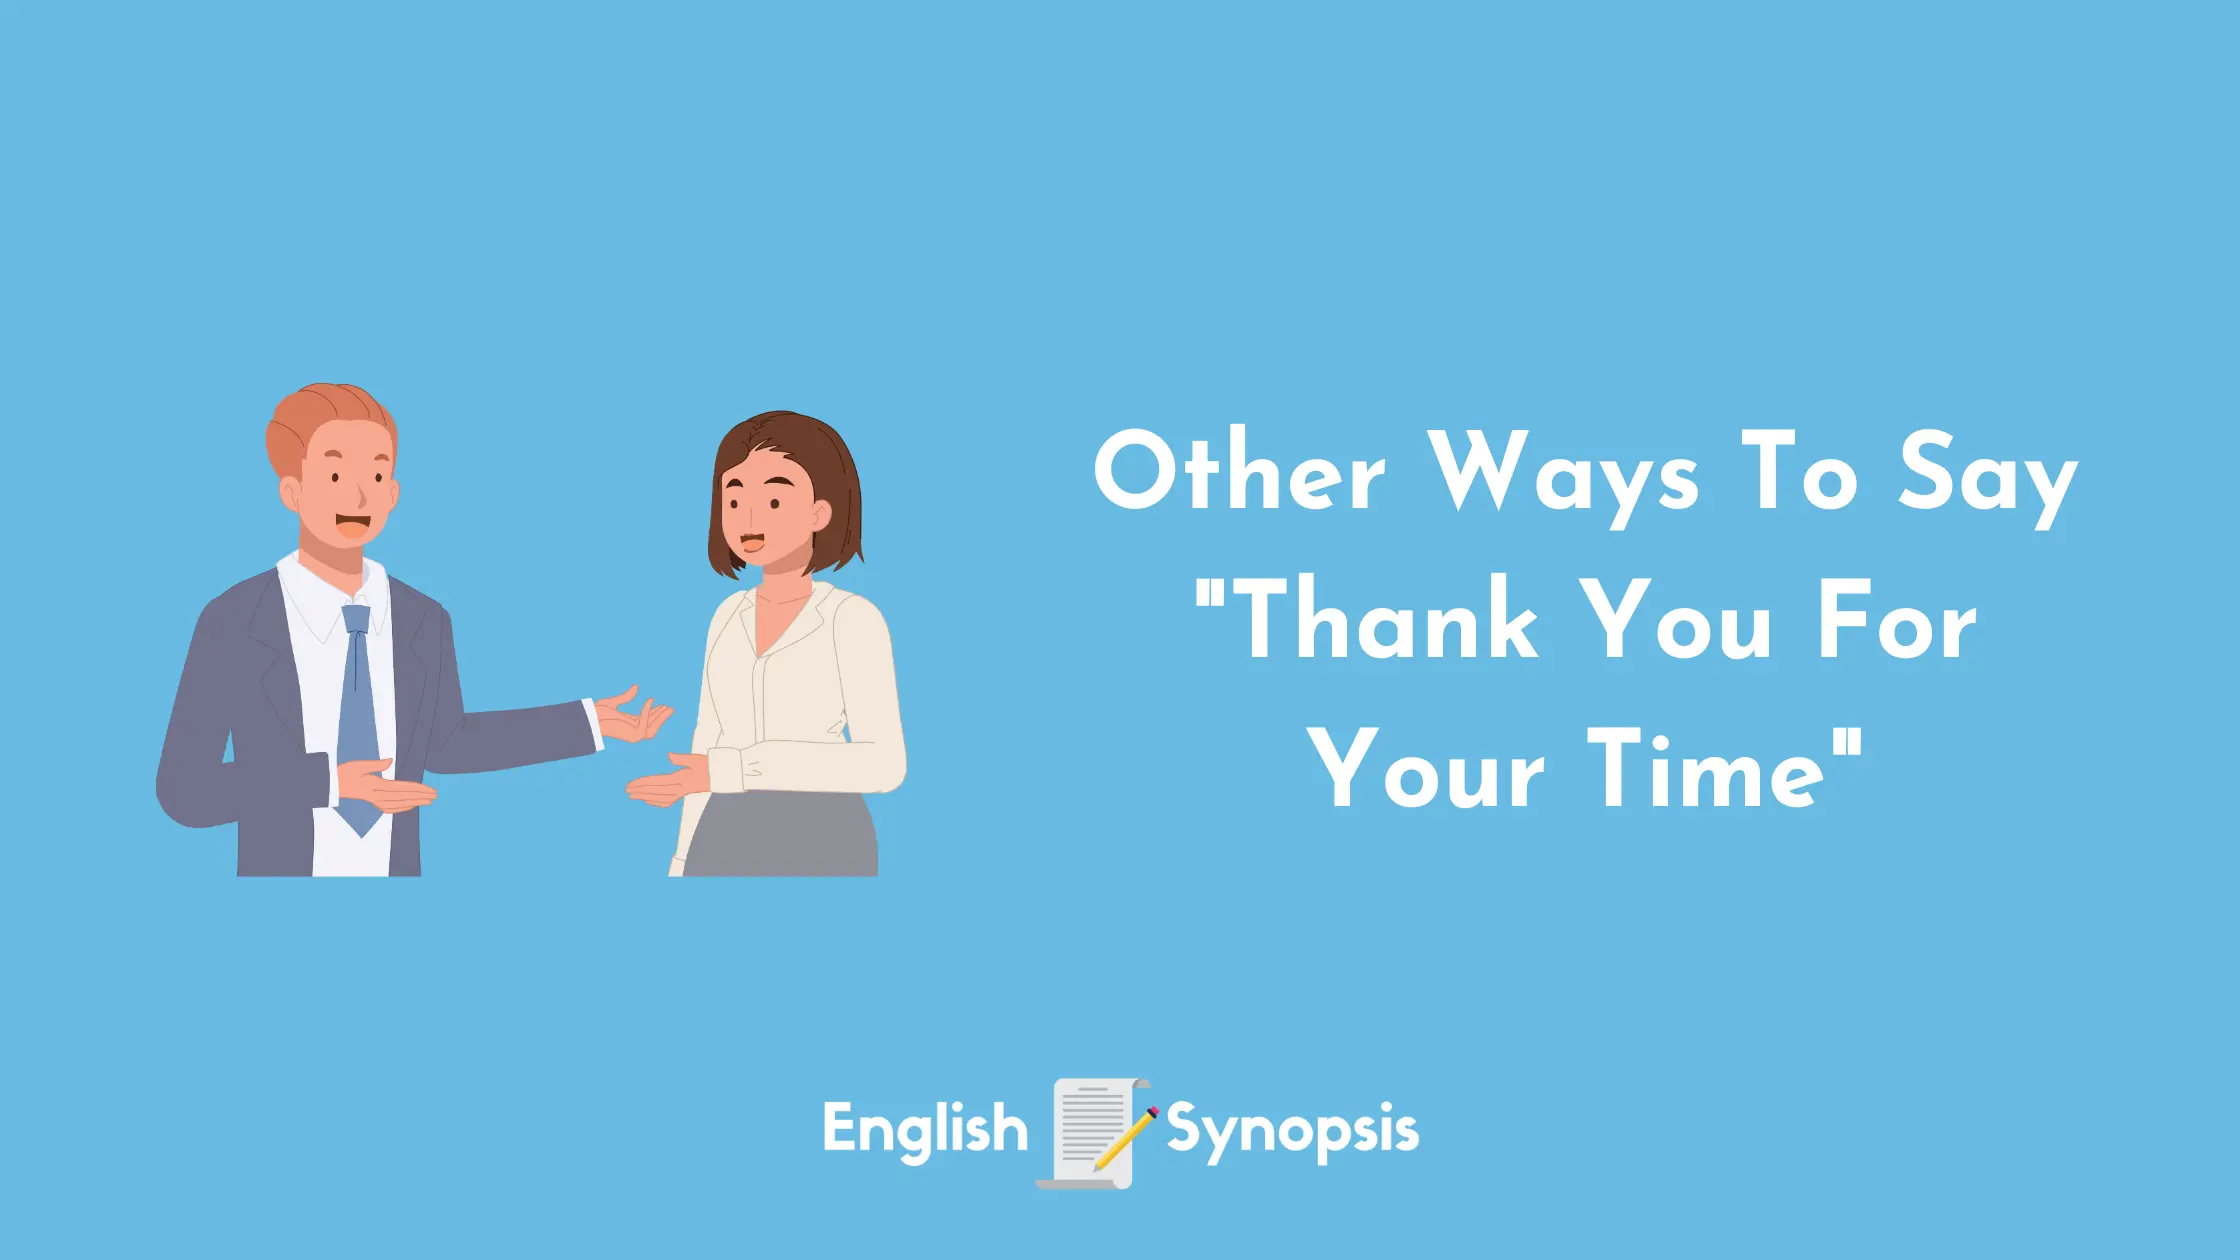 Other Ways To Say "Thank You For Your Time"